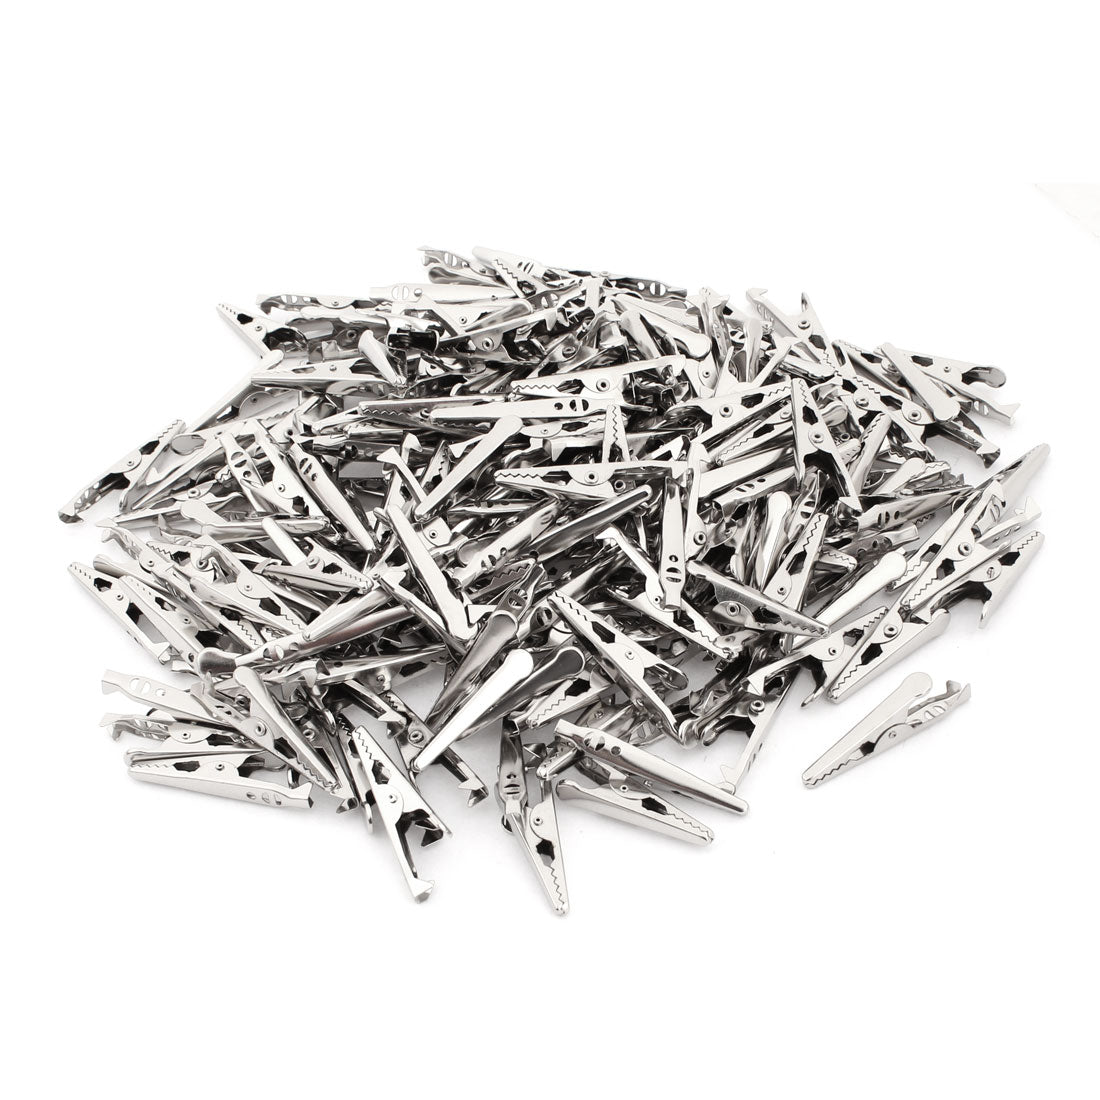 uxcell Uxcell 200 Pcs Silver Tone Metal Electric Test Probe Crocodile Alligator Clips Clamps